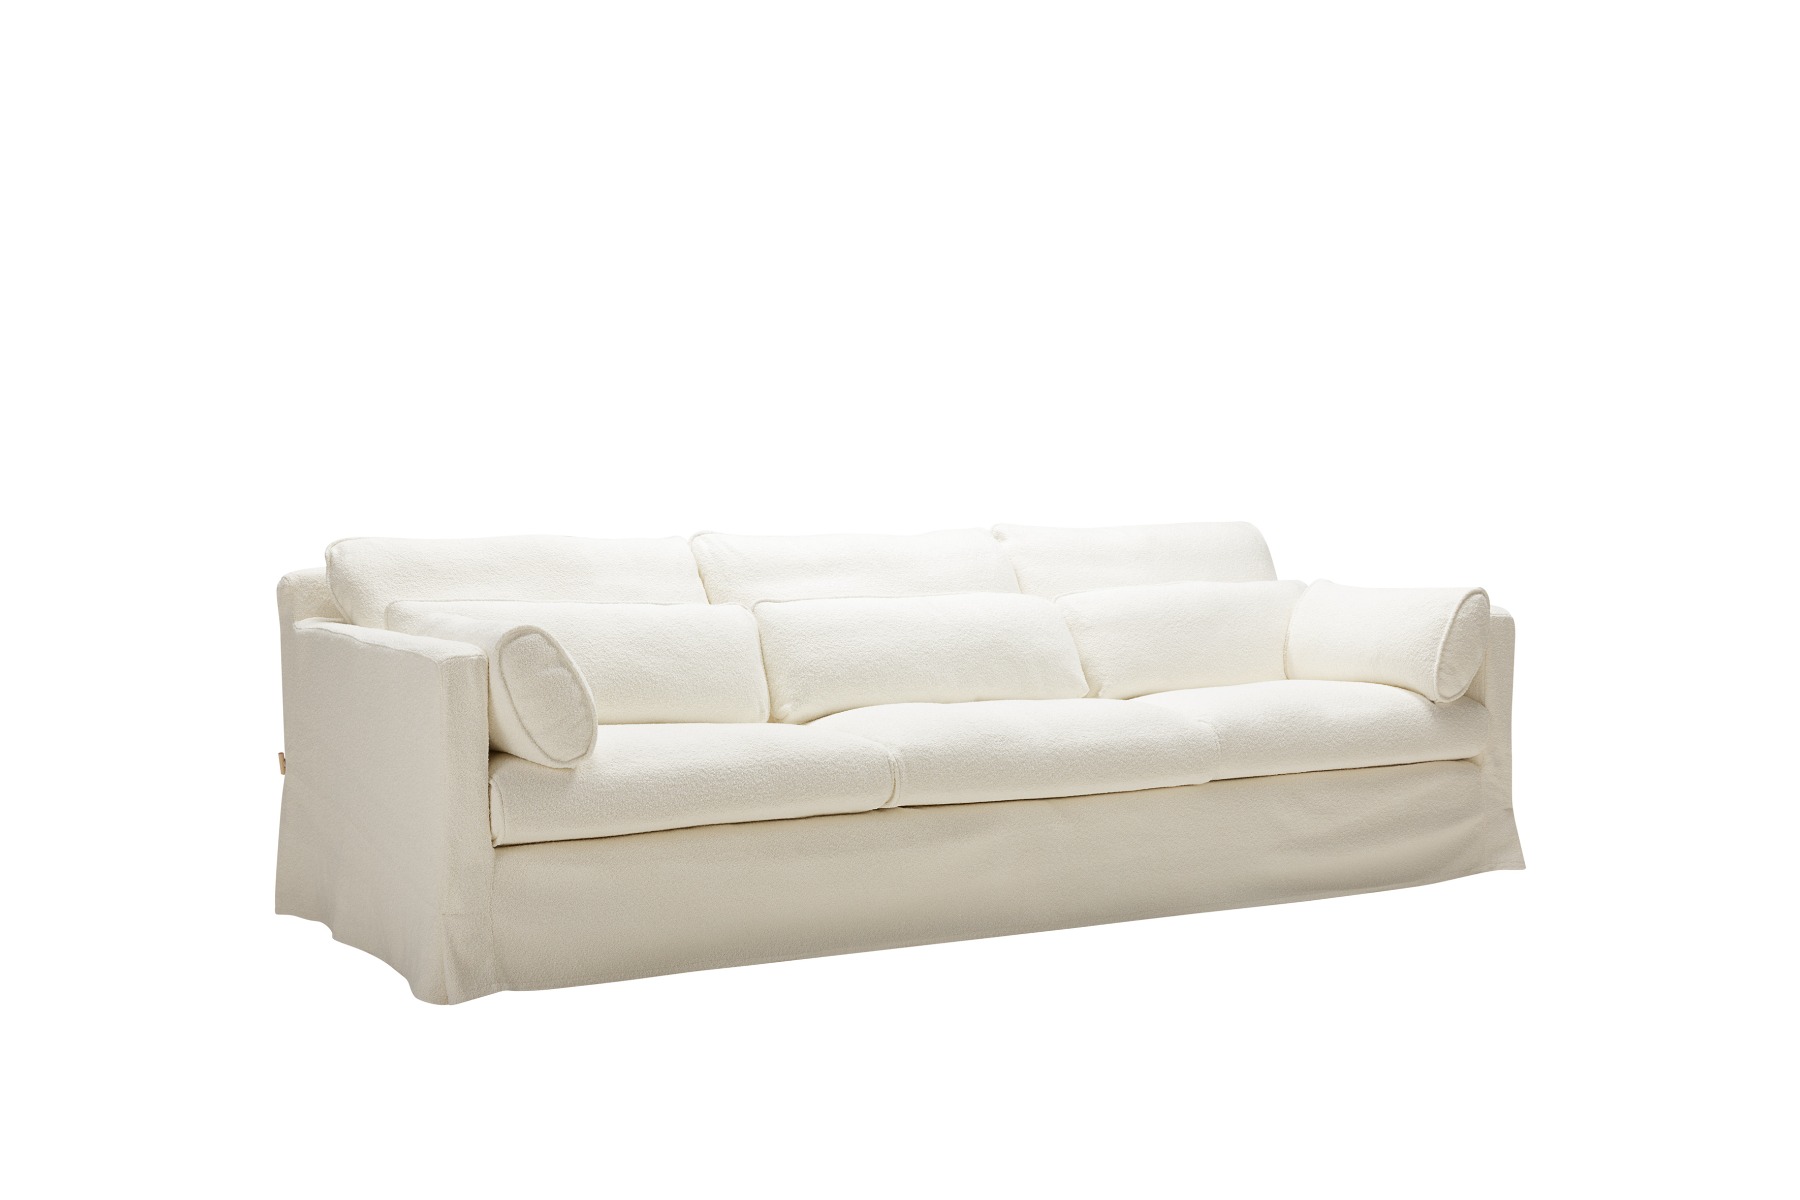 The Sara 4 Seater with Loose Cover & Grade II Fabric